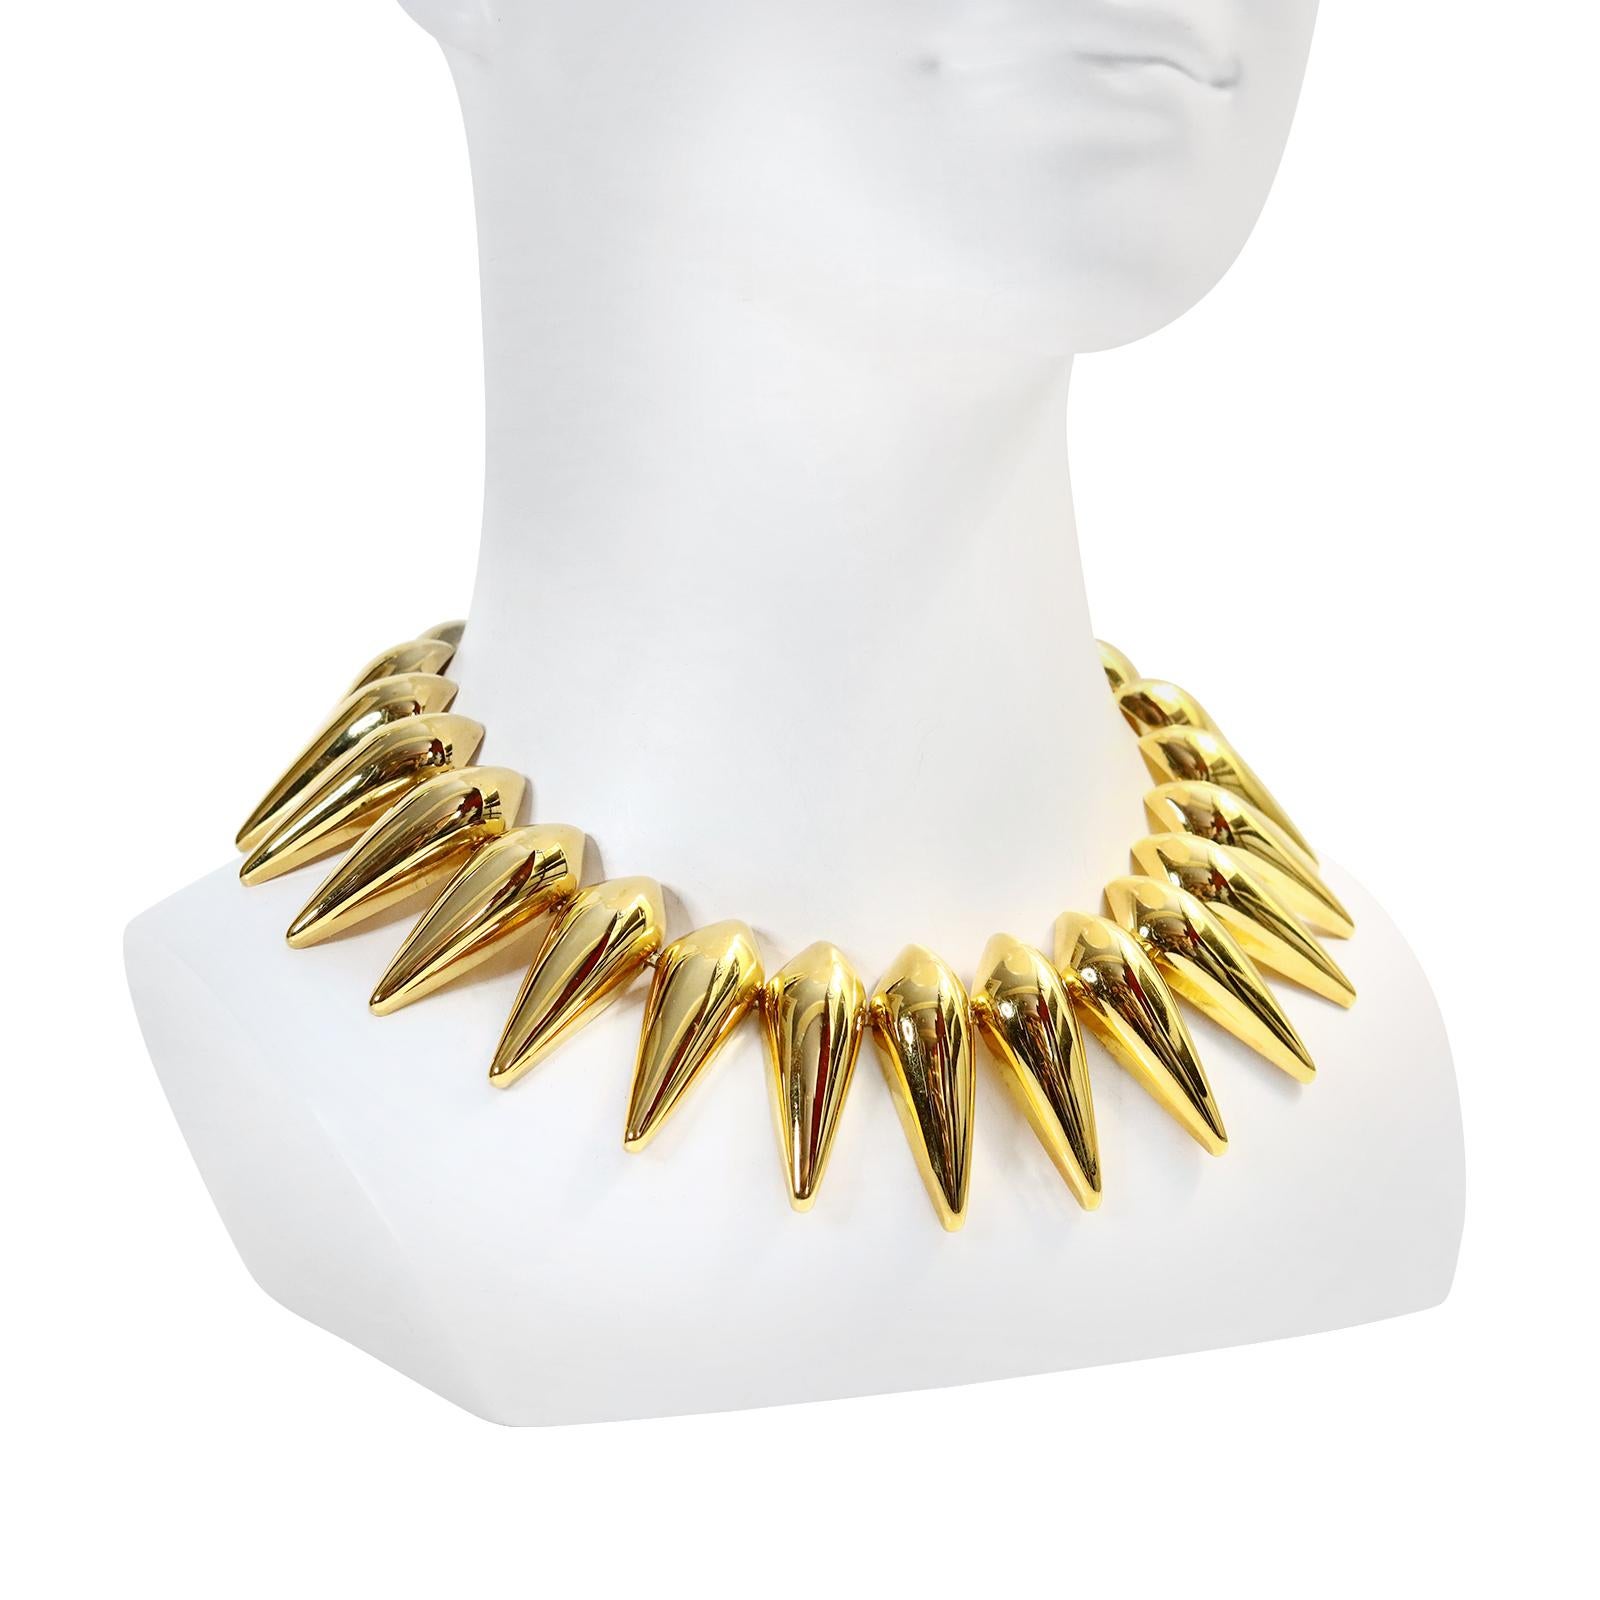 Vintage Monet Spiky Gold Tone Necklace Circa 1970s. Sum of the whole is how I would describe this necklace.  Each piece comes together to form a statement.  The length is from 16-18